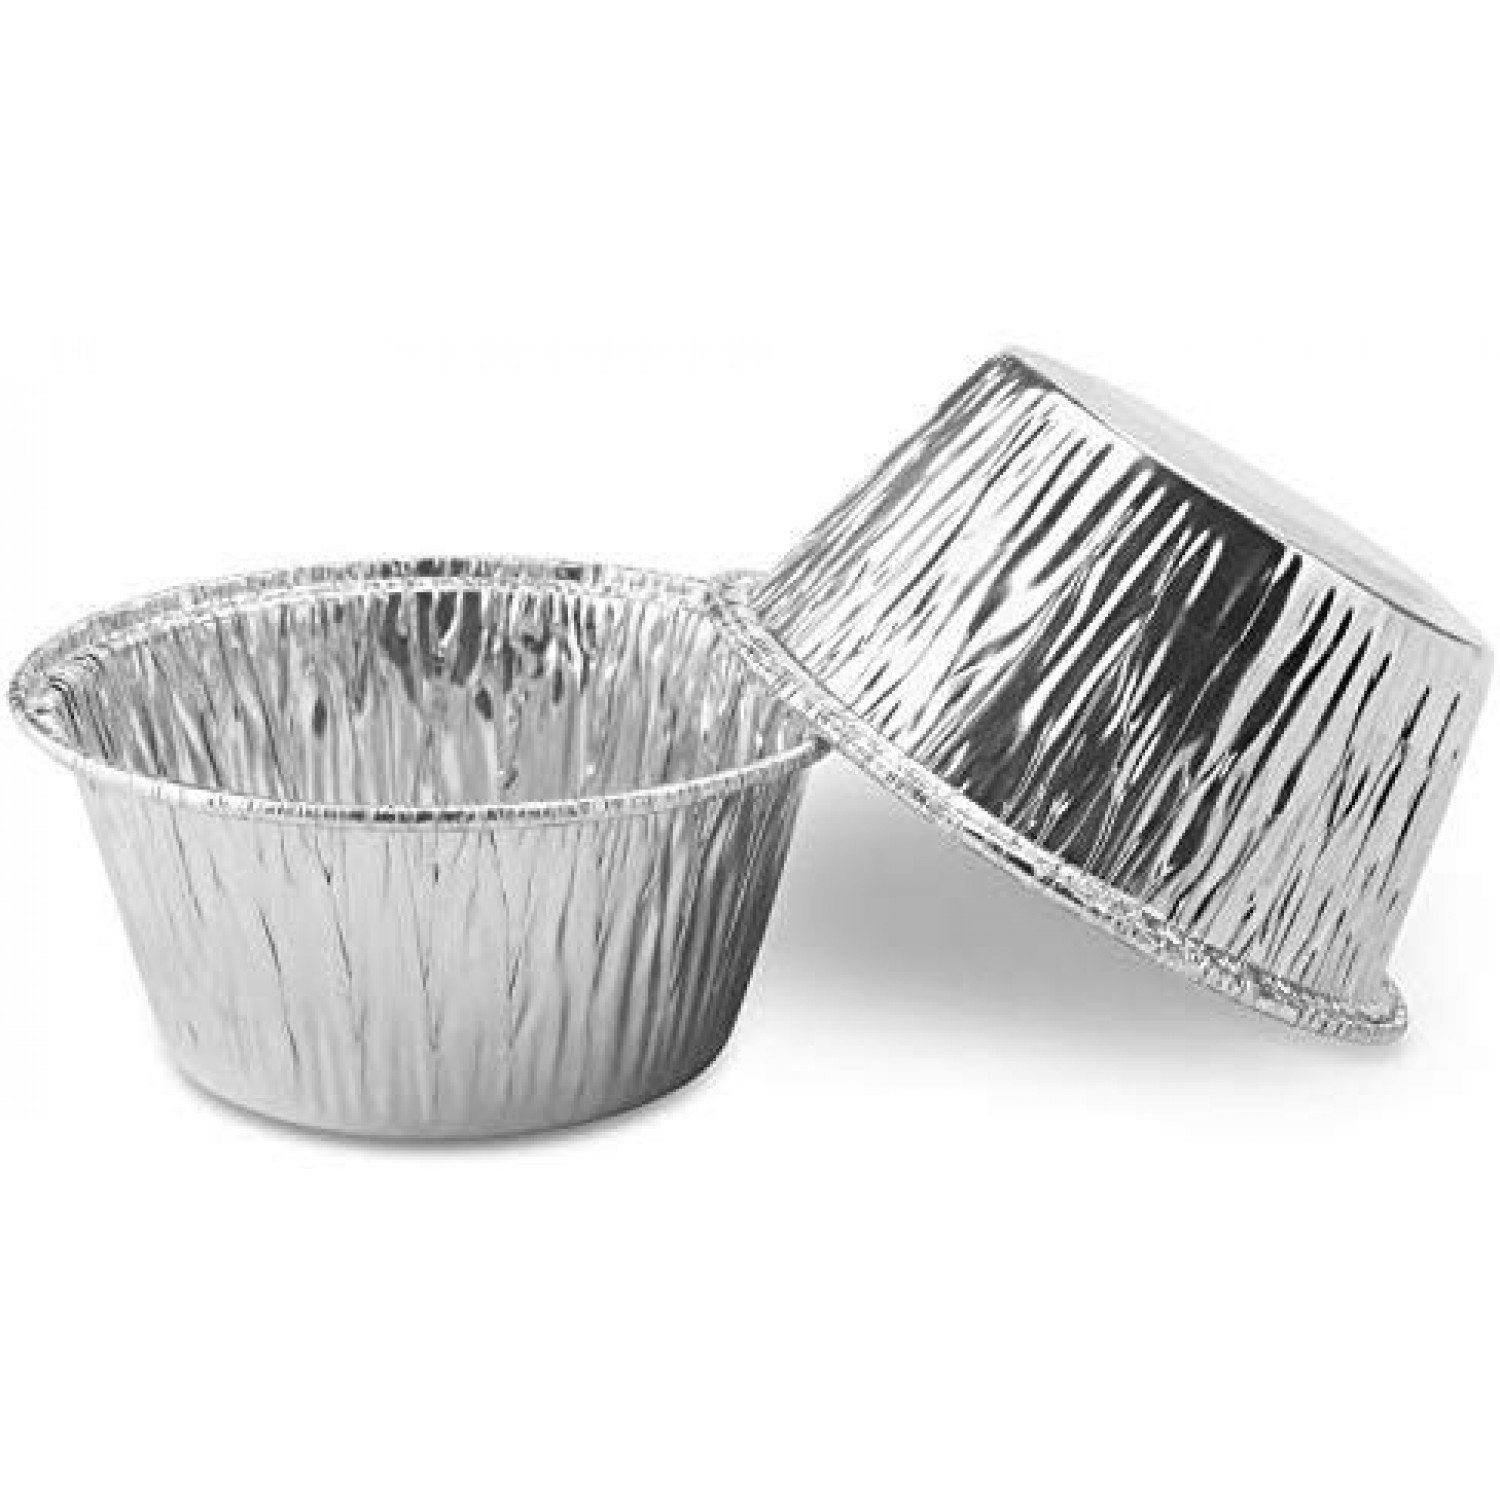 Alegacy Aluminum Muffin/Cup Cake Pan - 24 Cup, 2 3/4 inch Top